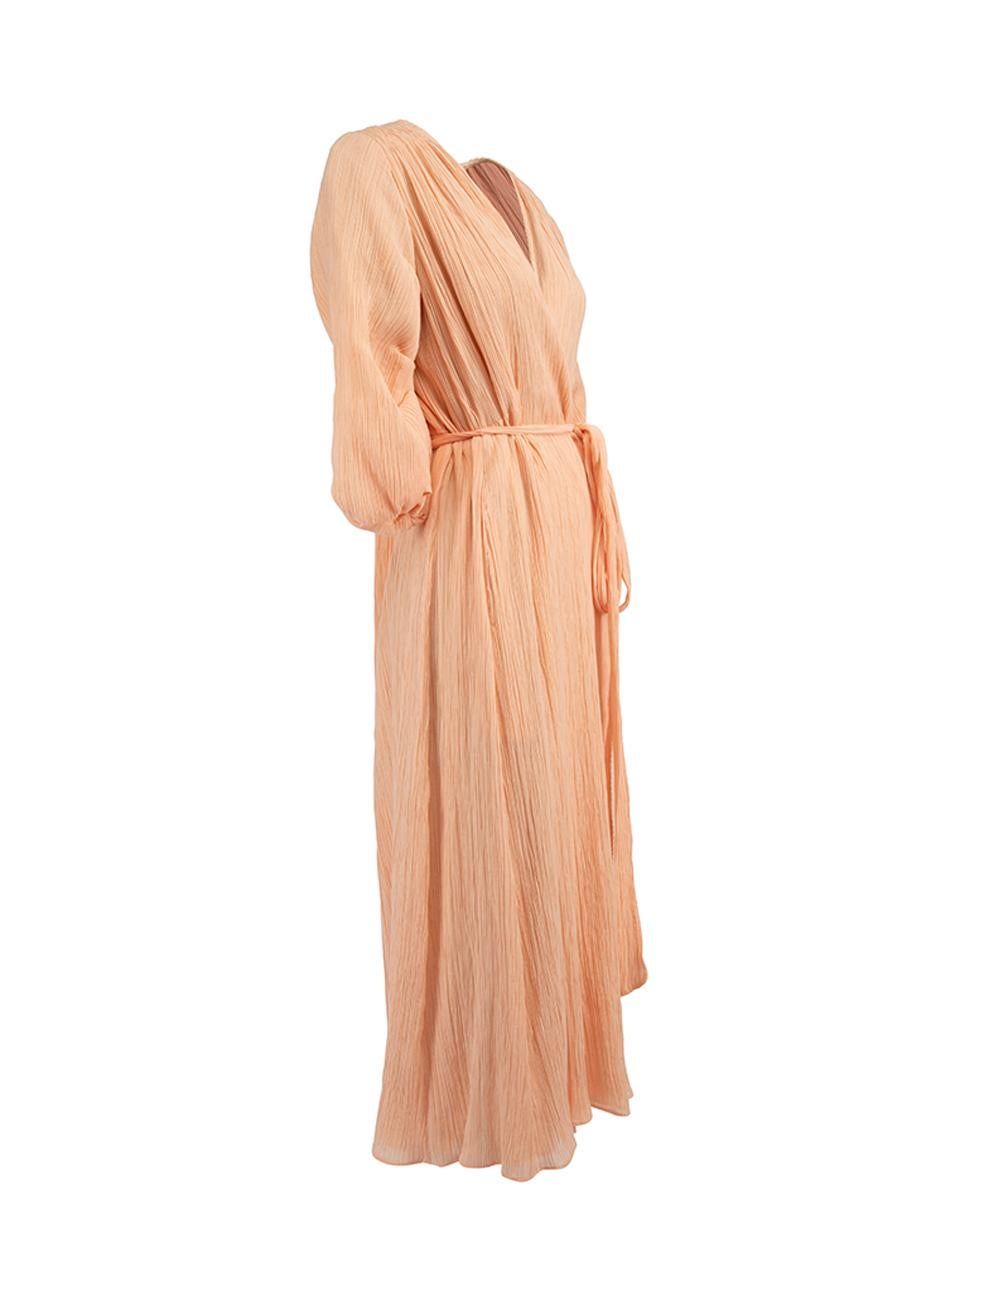 CONDITION is Very good. Hardly any visible wear to dress is evident on this used Gabriela Hearst designer resale item.  Details  Light salmon Cotton, silk blend Long sleeves V neck Wrap dress with waist tie Puff sleeves Pleated texture Midi length